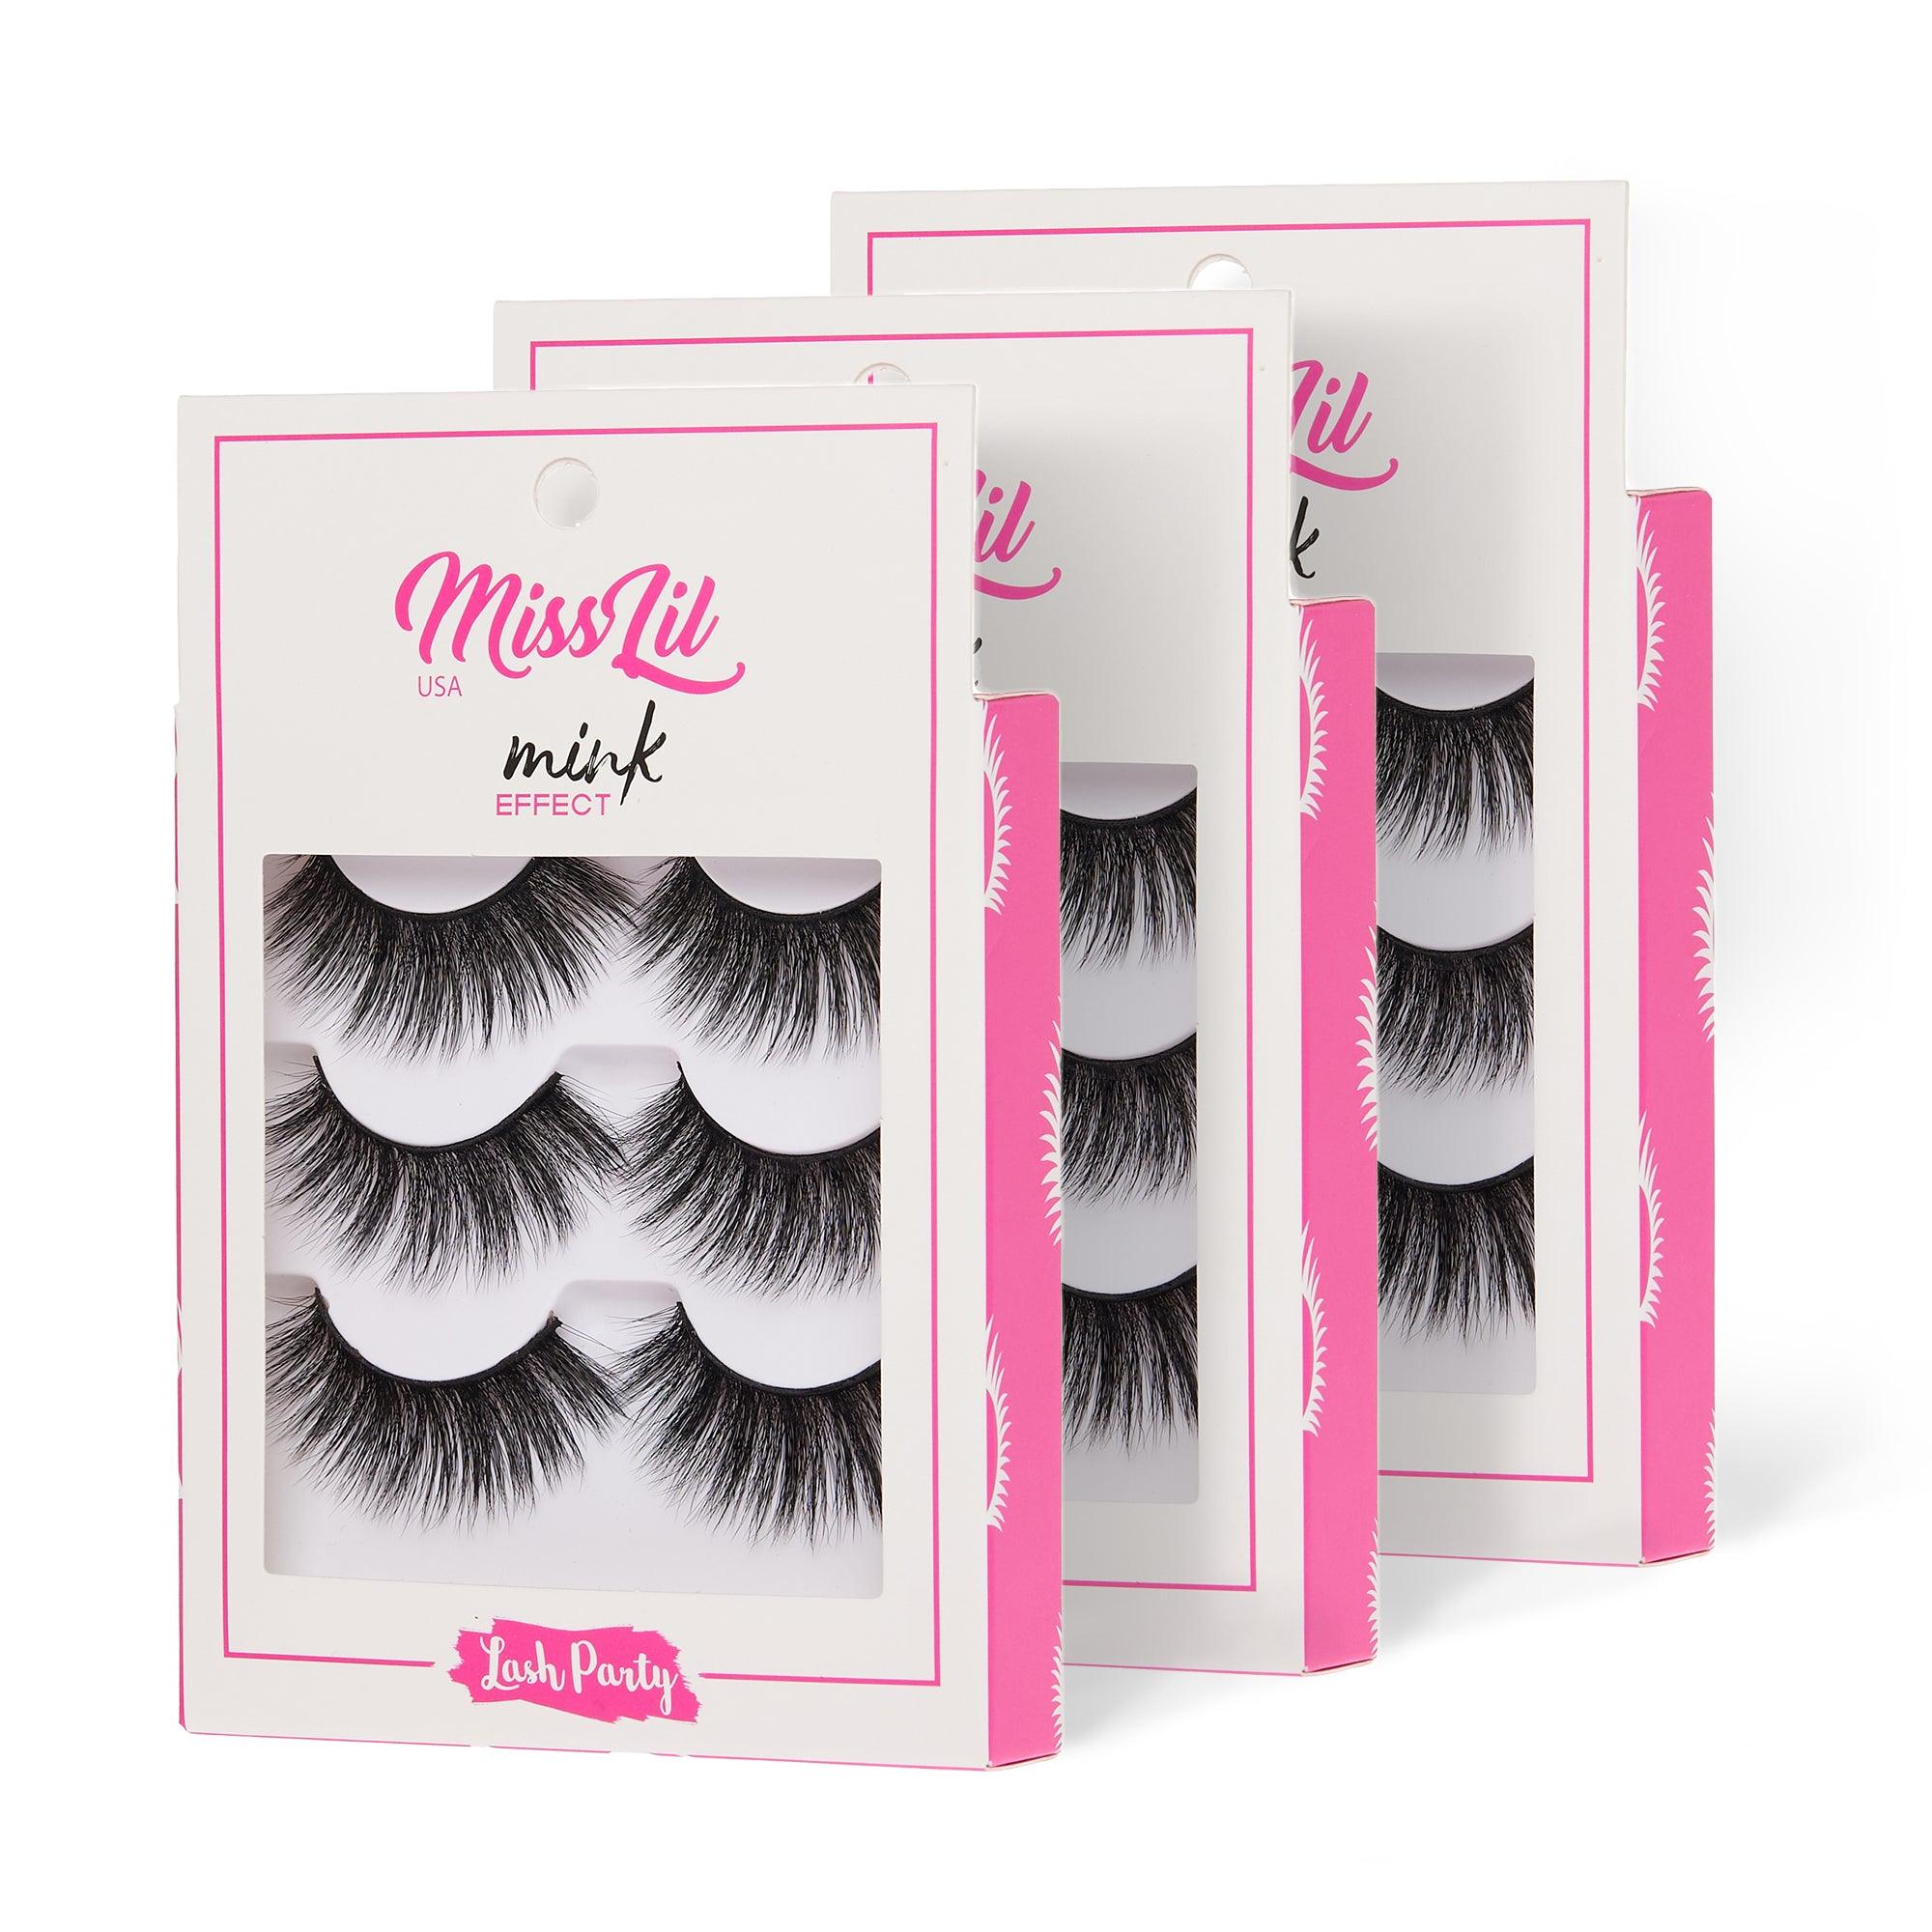 3-Pair Faux Mink Effect Eyelashes - Lash Party Collection #1 - Pack of 3 - Miss Lil USA